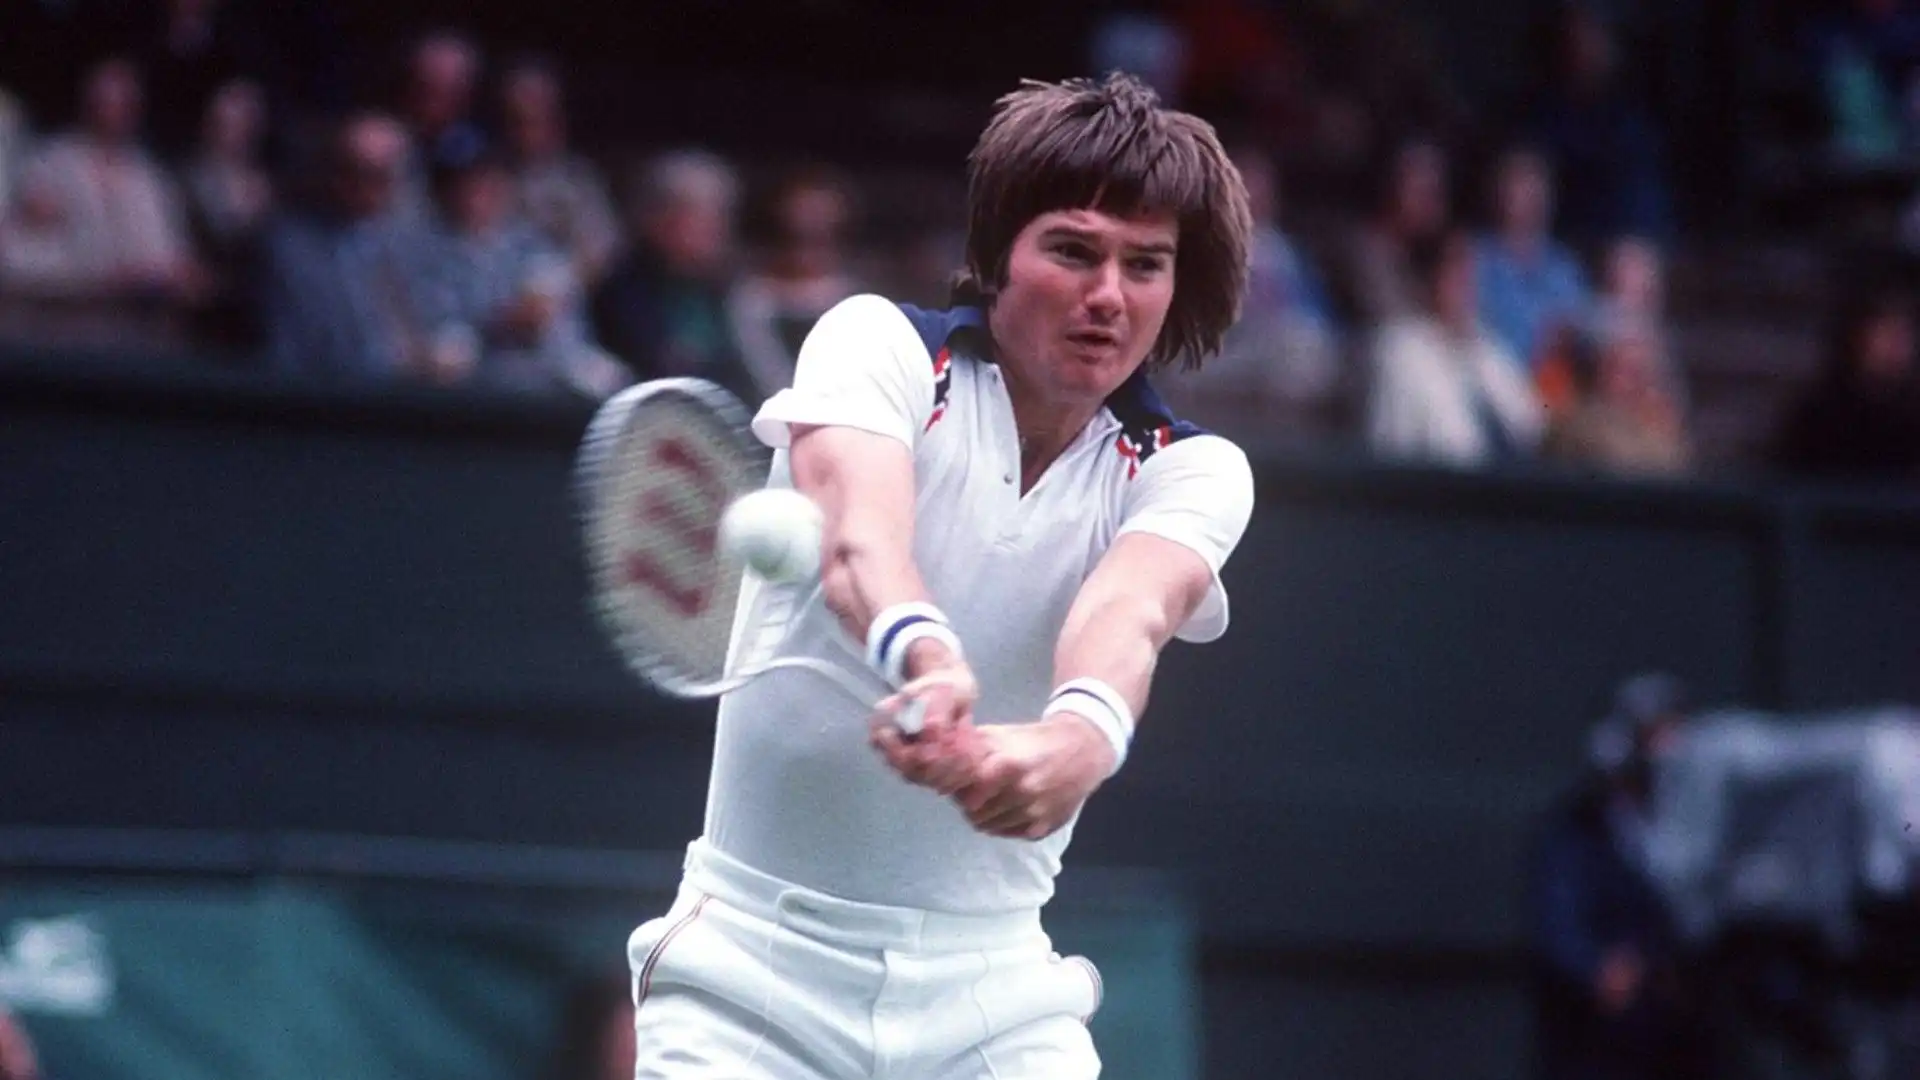 7. Jimmy Connors